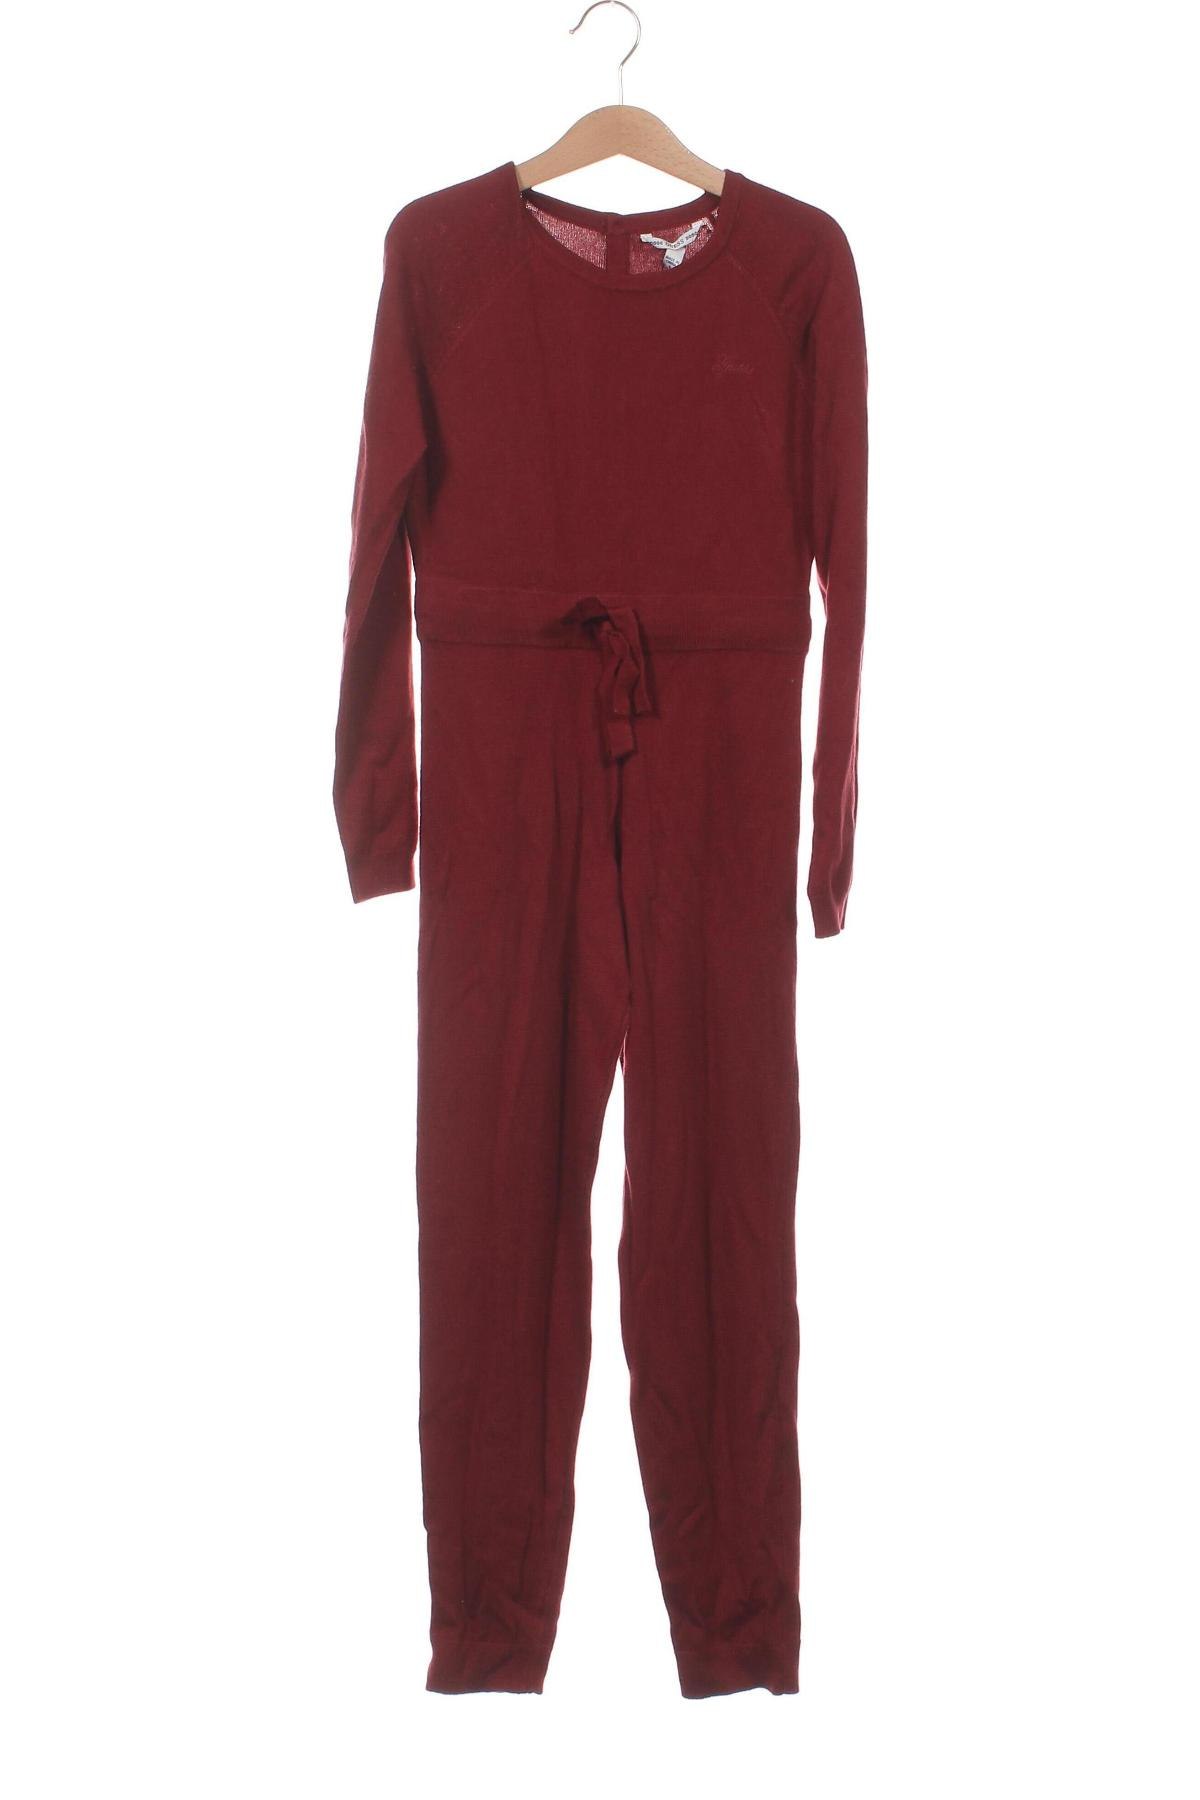 Kinder Overall Guess, Größe 7-8y/ 128-134 cm, Farbe Rot, Preis 33,12 €